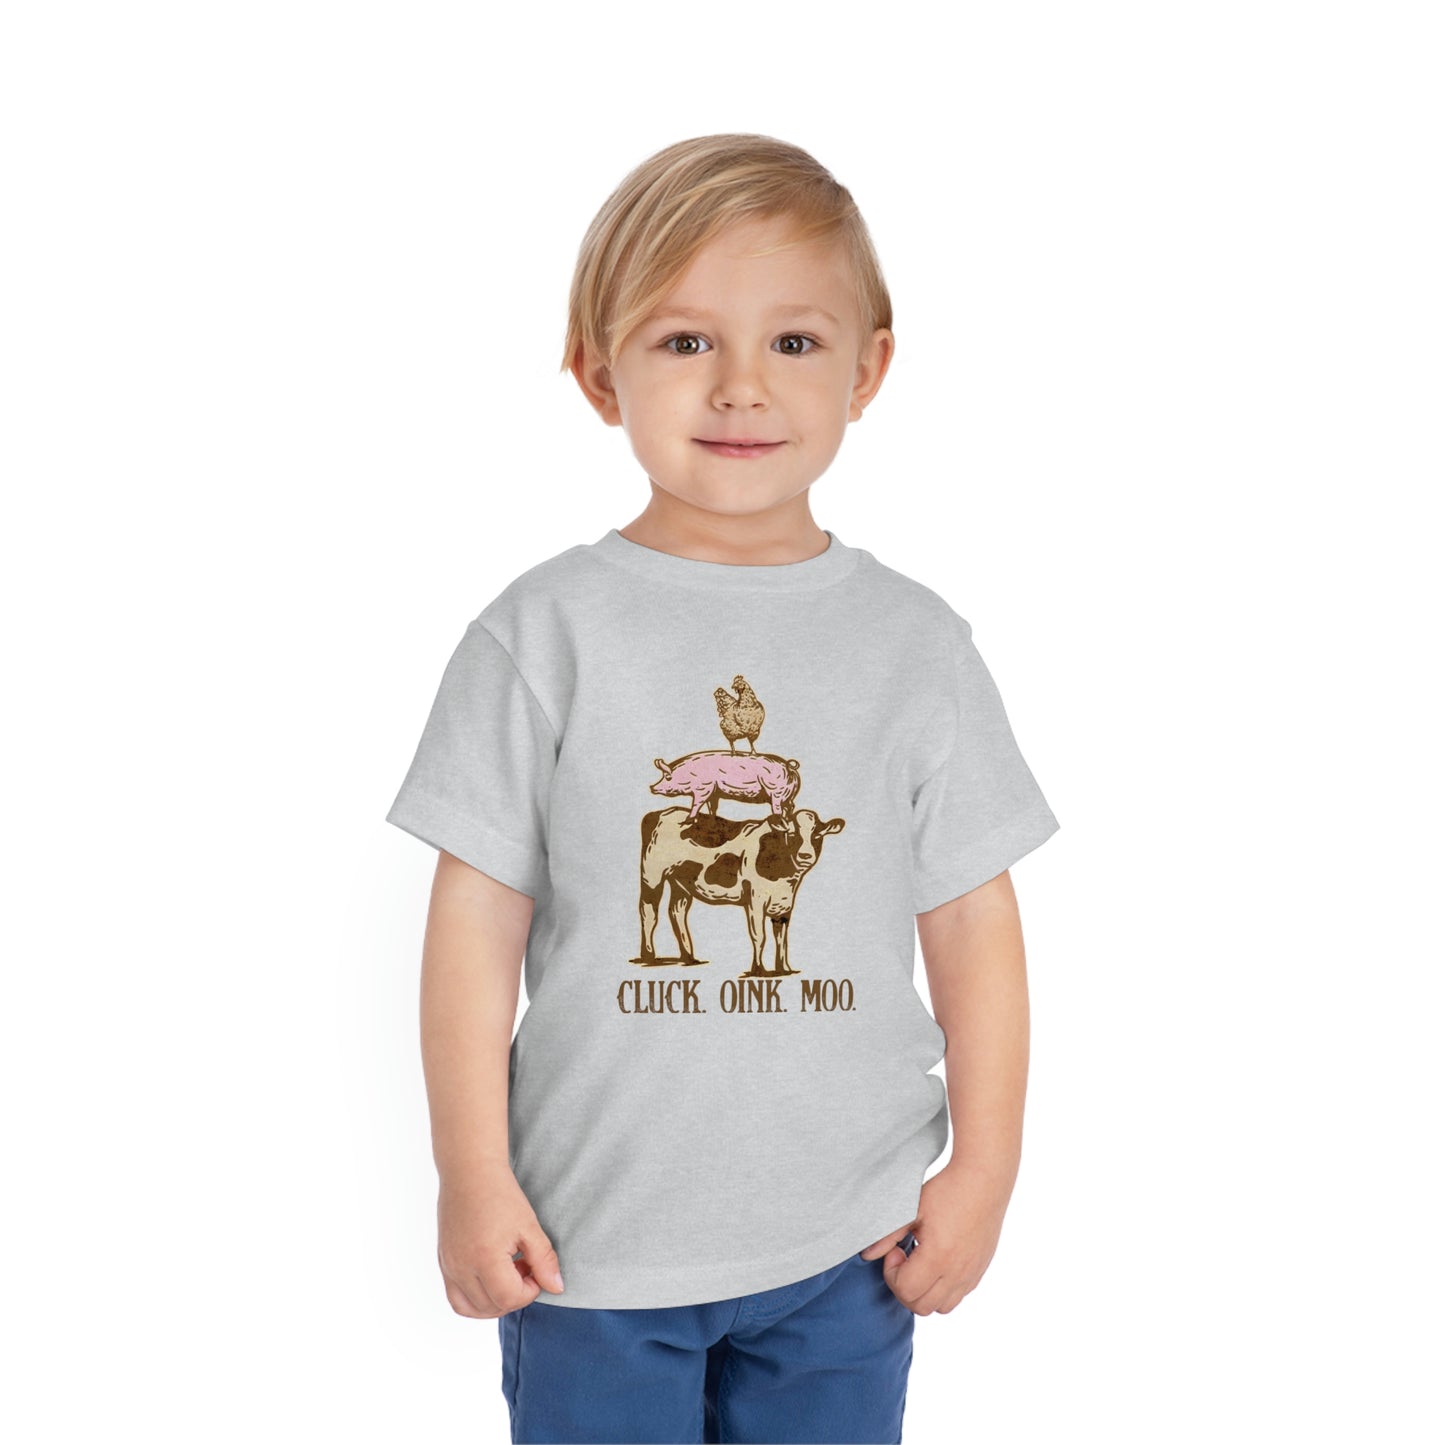 "Cluck, Oink, Moo" Toddler Short Sleeve Tee (2T-5T)